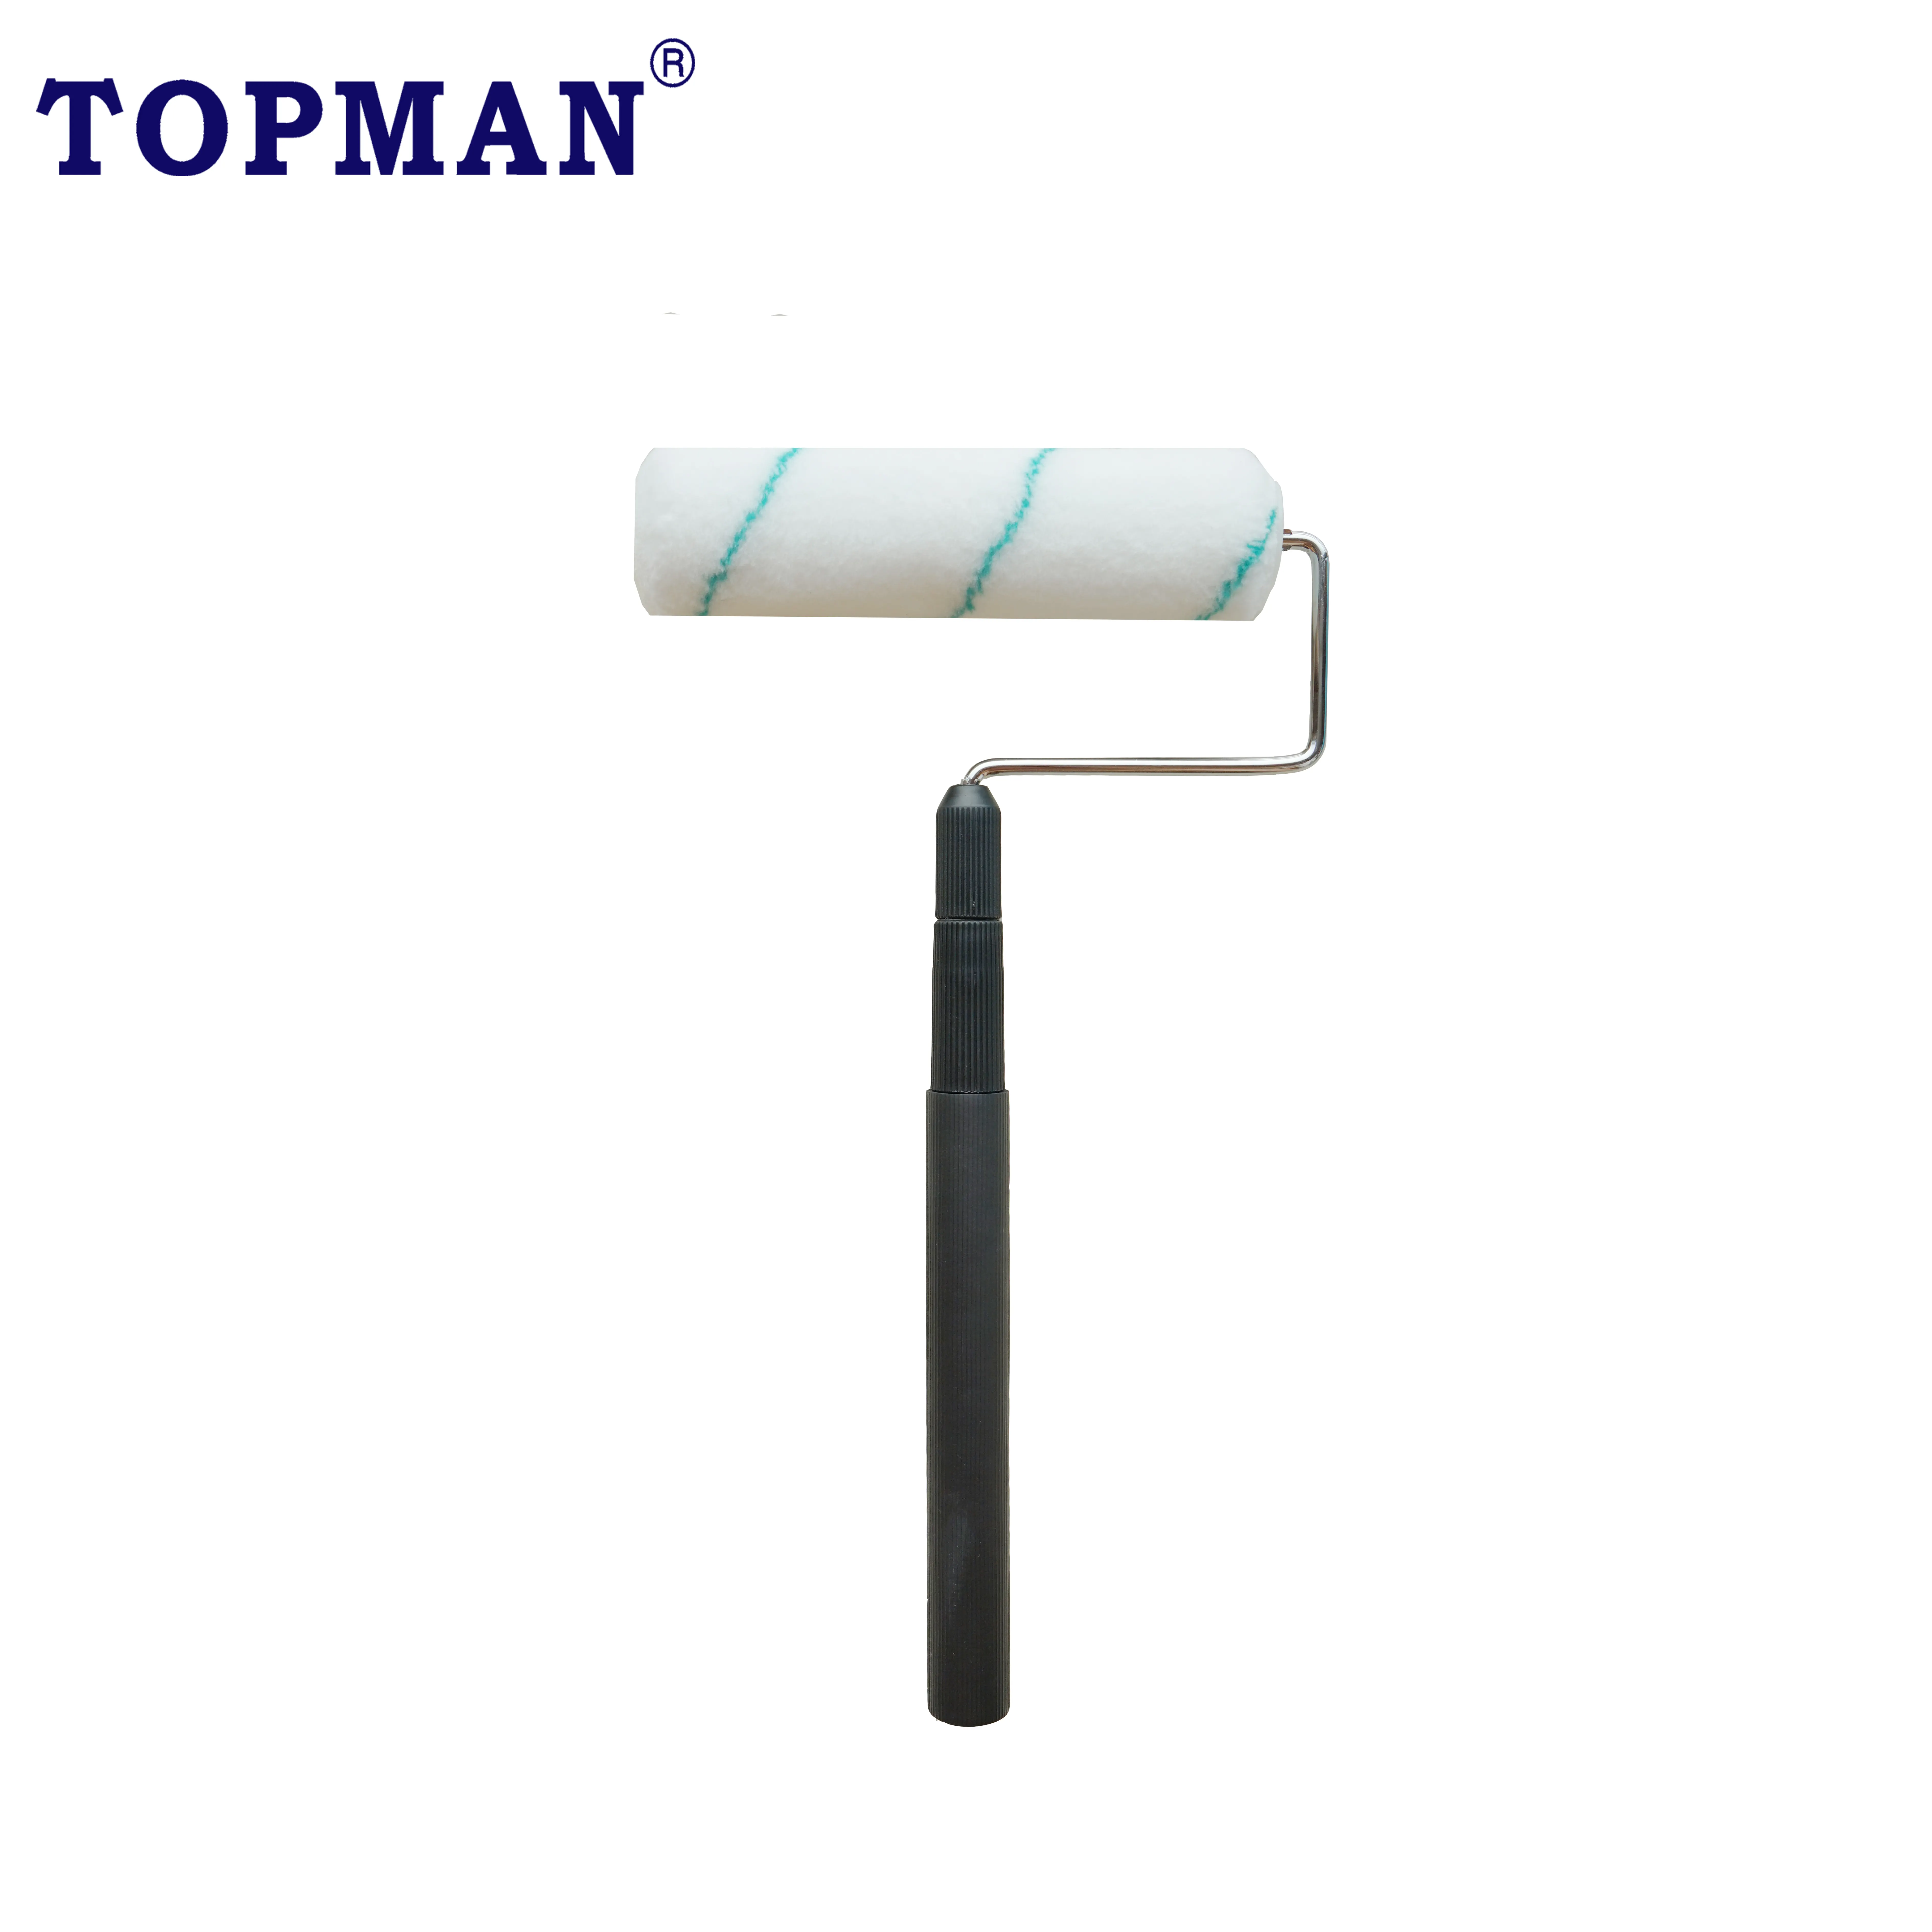 Customized painting tool 9'' industrial european style foam paint roller brush extendable